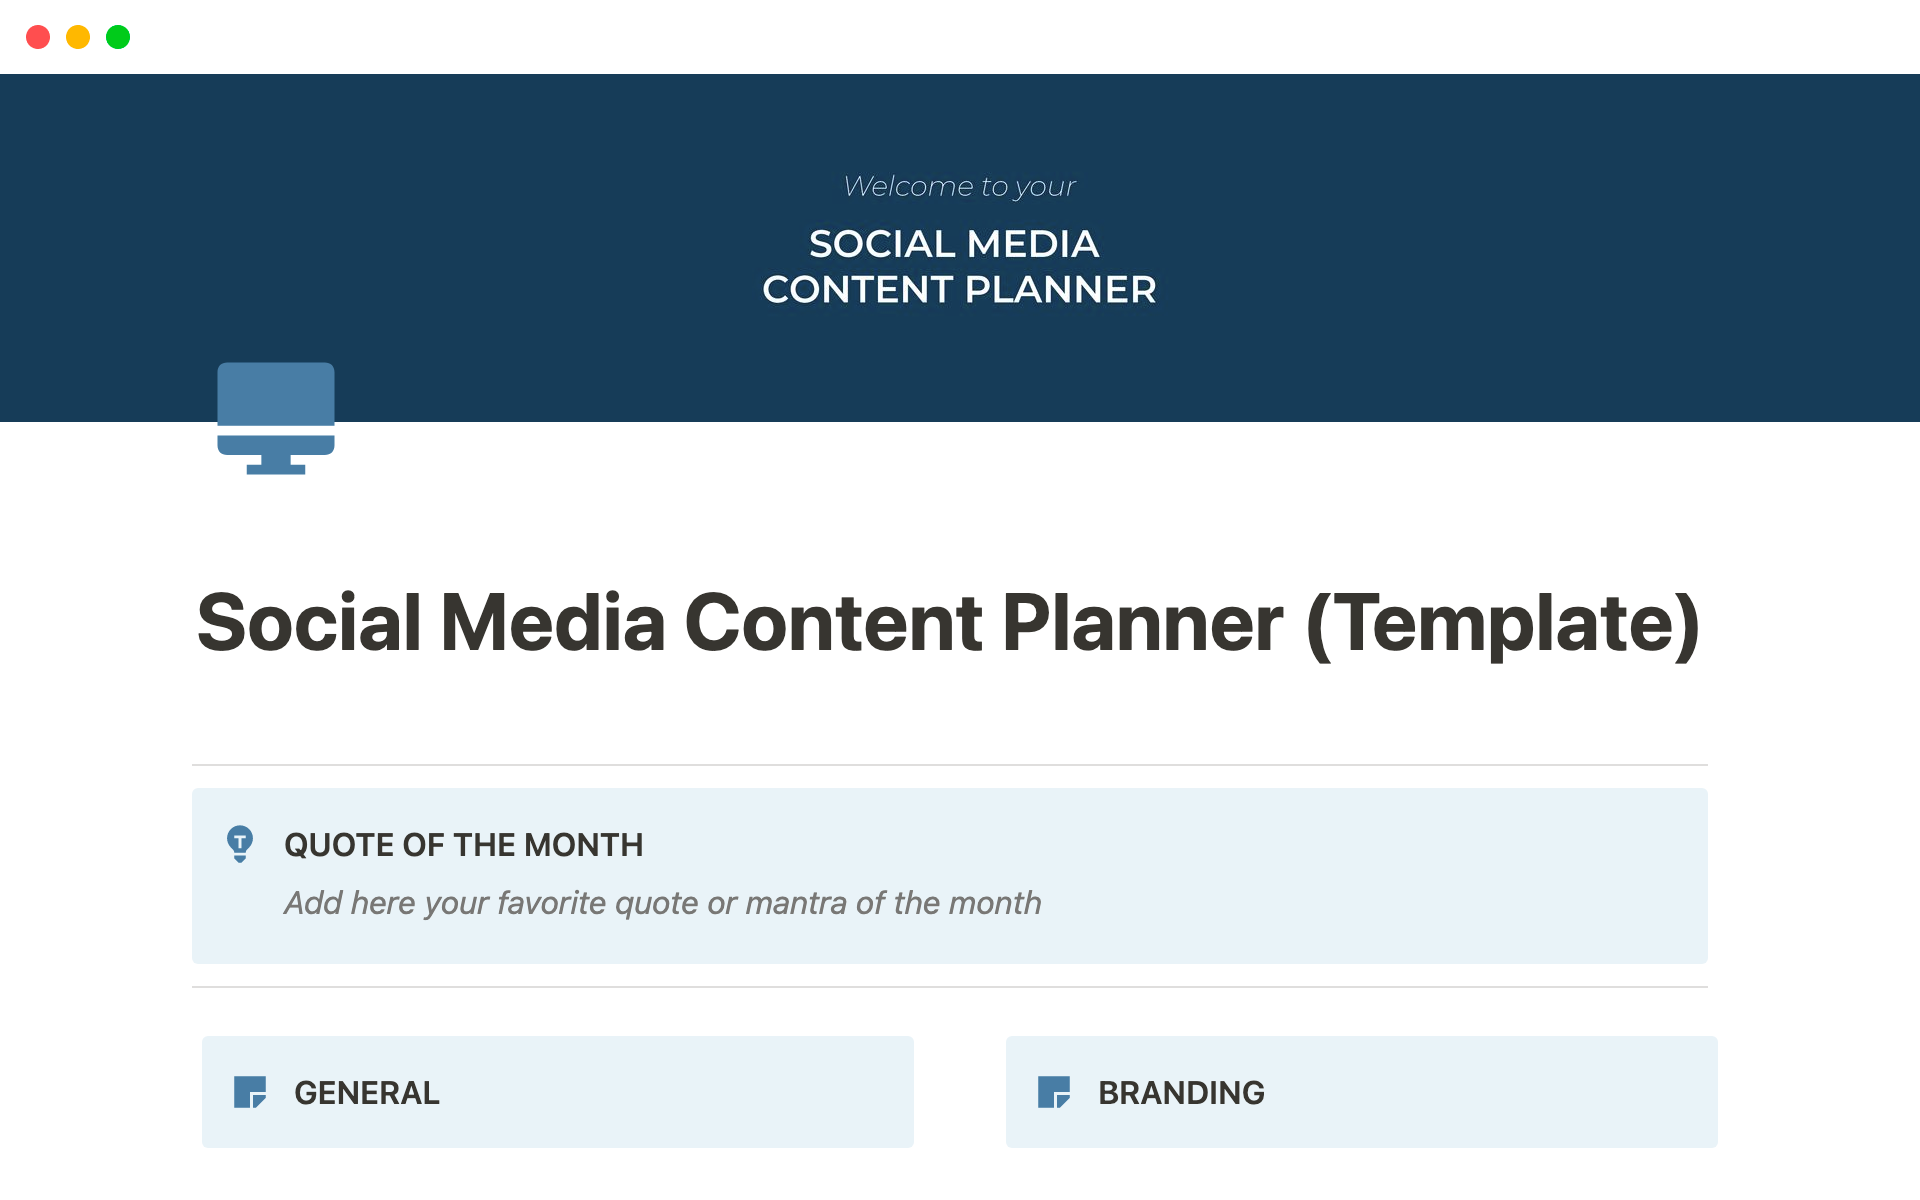 Mallin esikatselu nimelle Social Media Content Planner: Unleash your social media potential with our content planner!